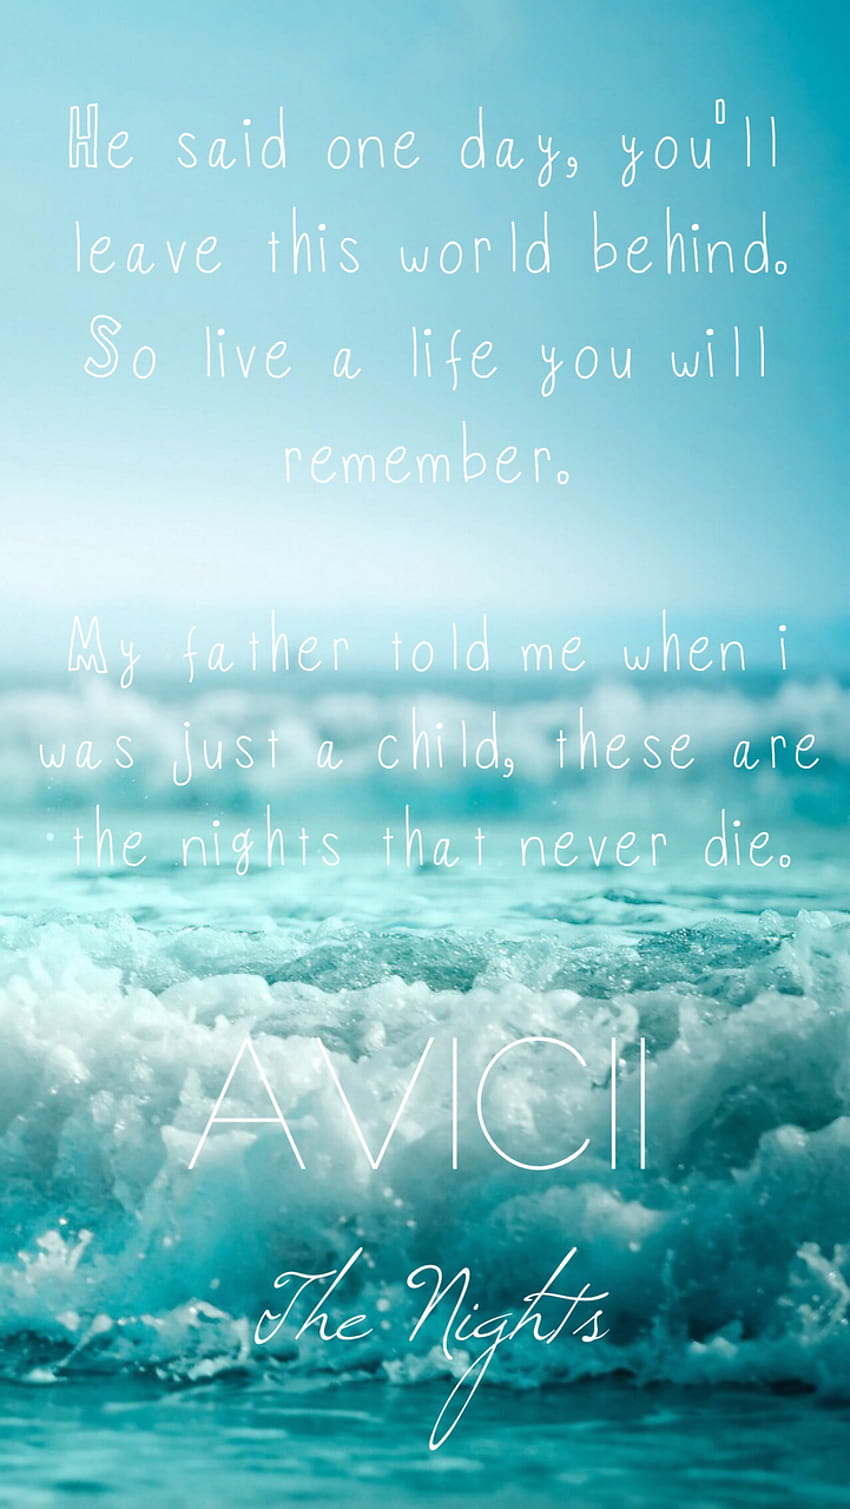 These are the nights that never die.., avicii the nights HD phone wallpaper